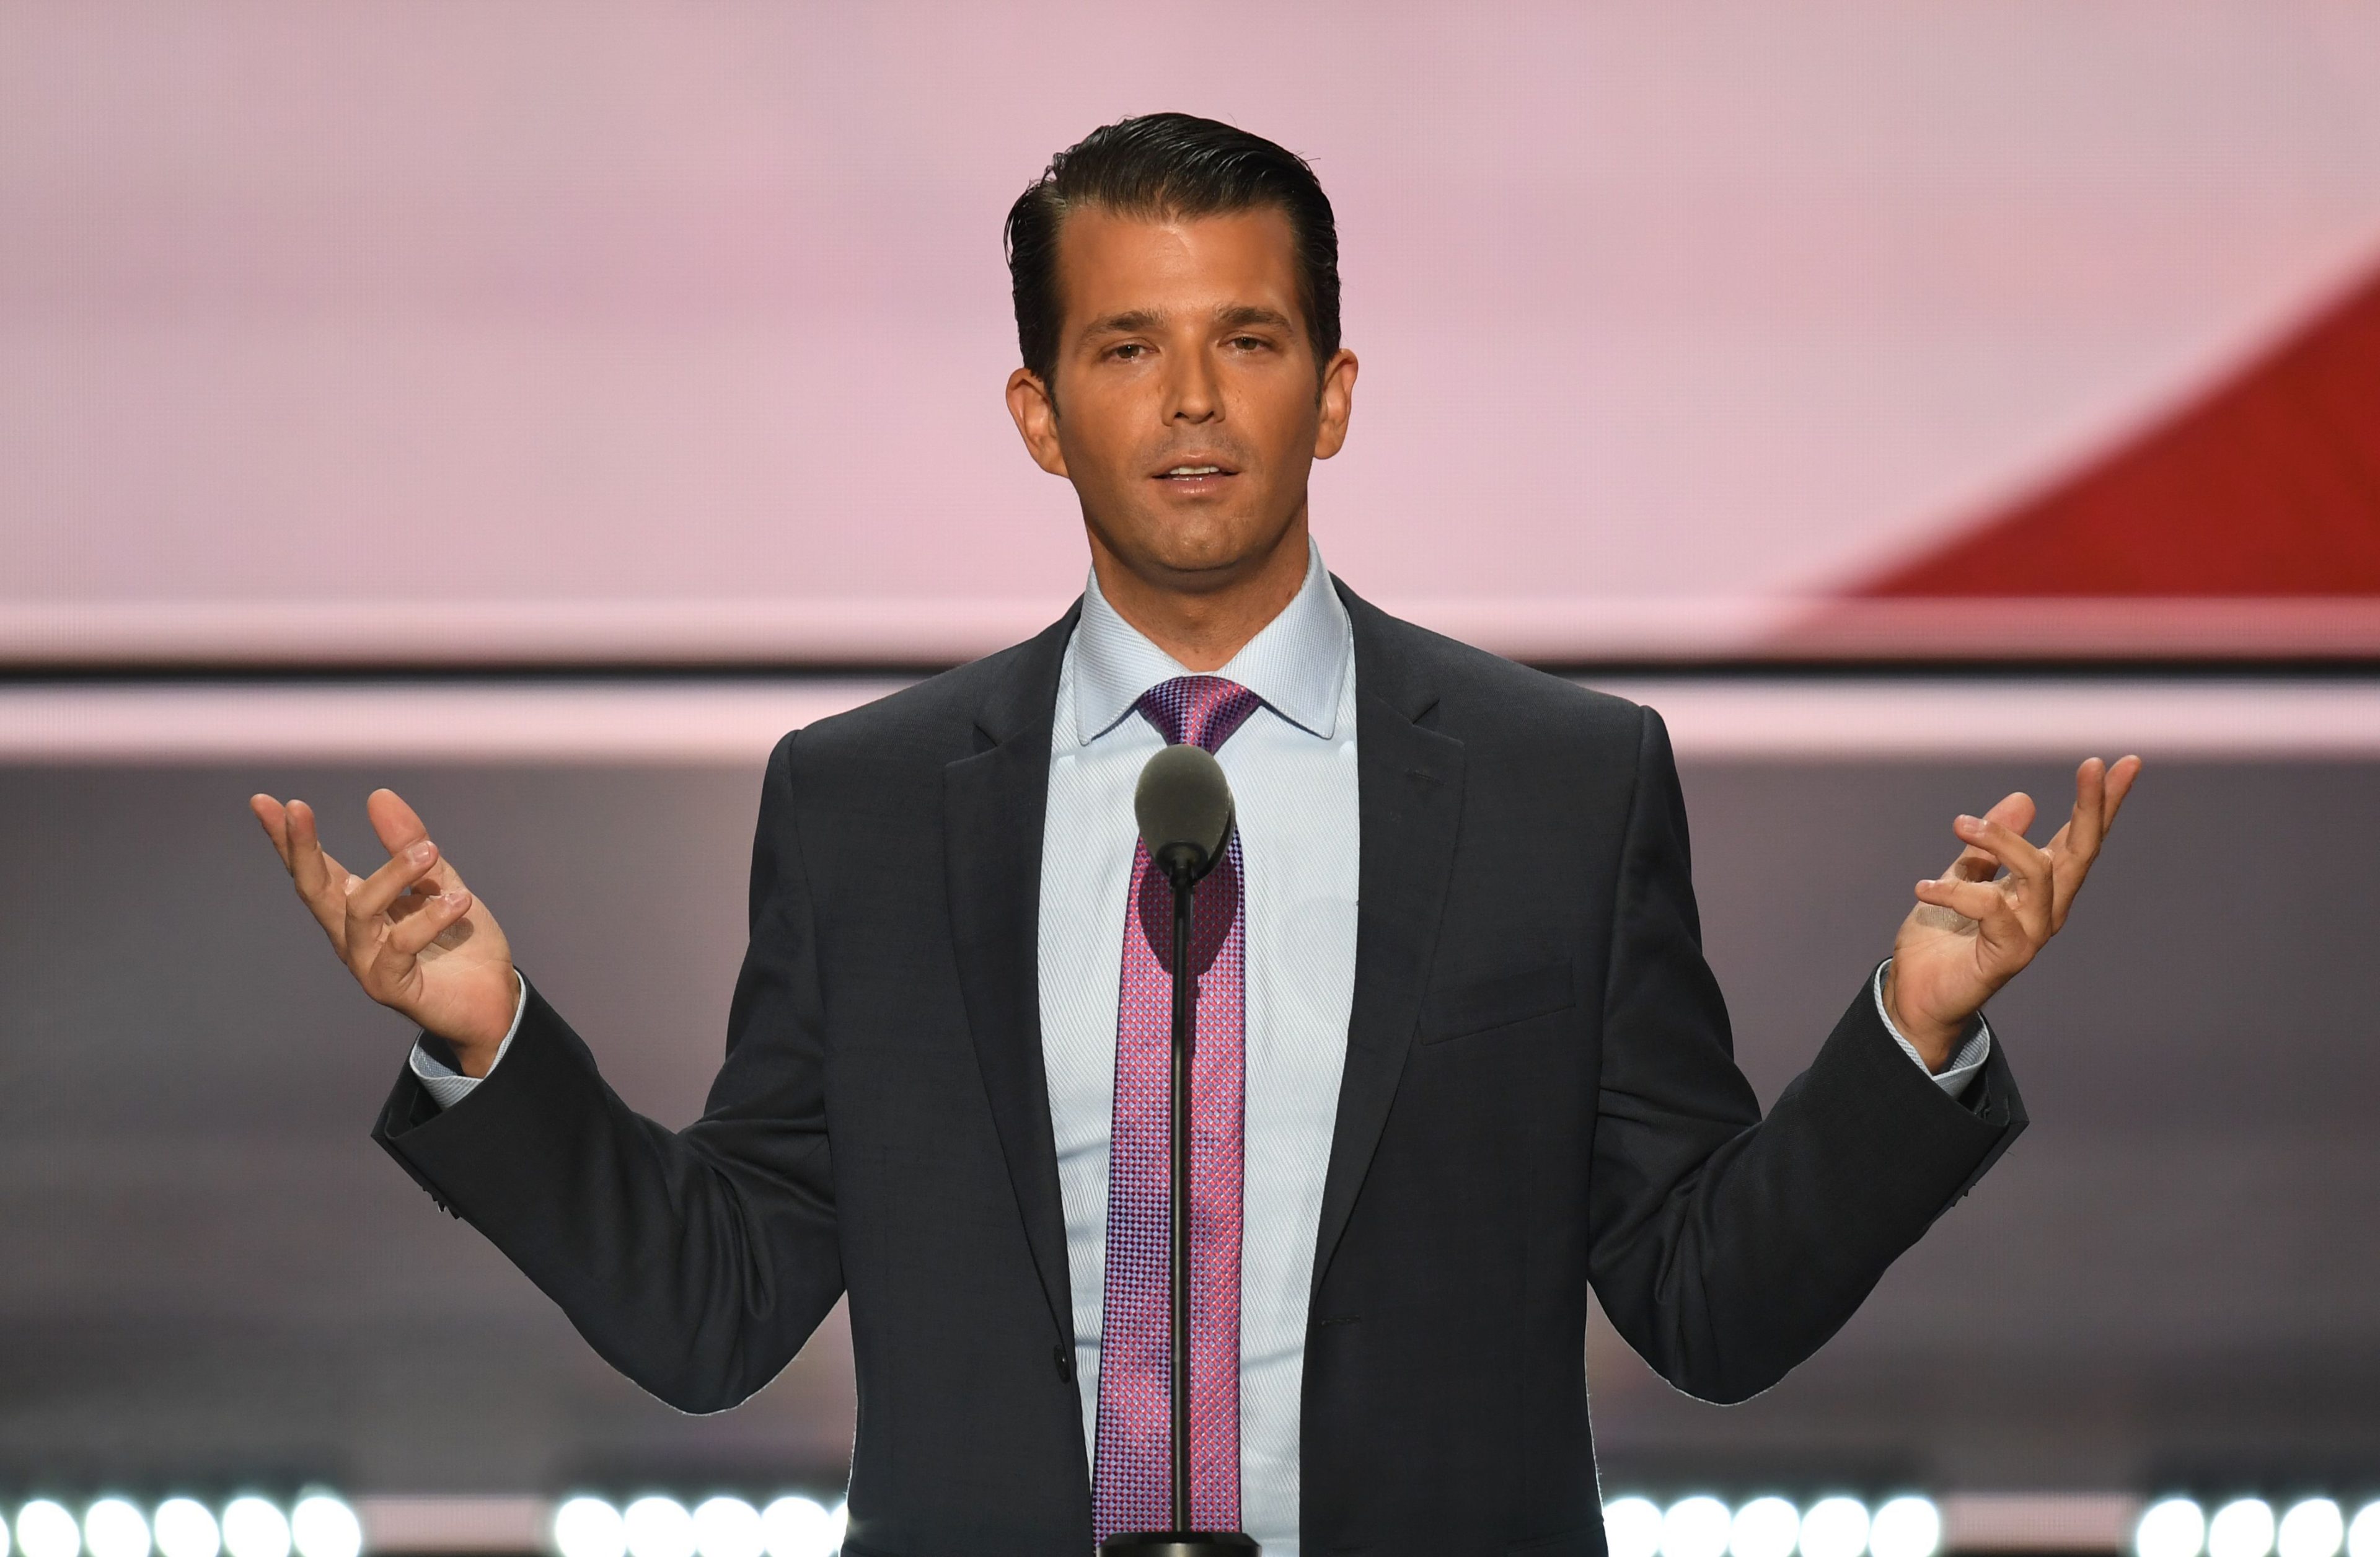 Donald Trump Jr. Met With Russian Lawyer During Presidential Campaign